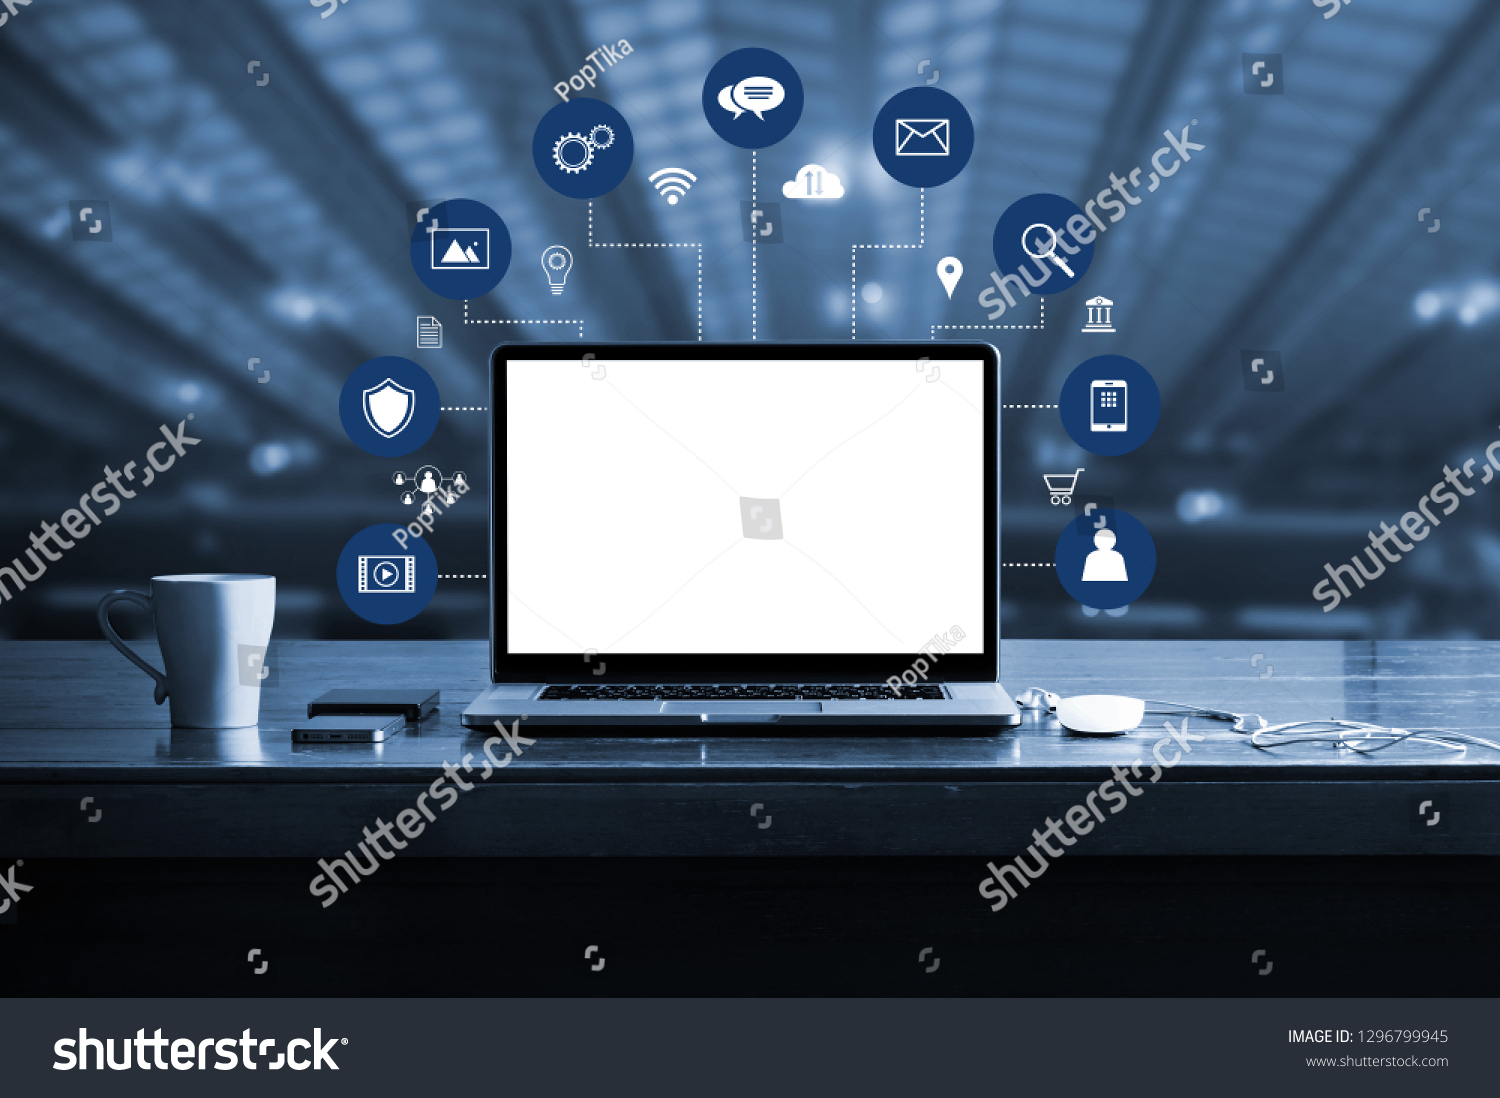 Digital marketing. laptop computer with white screen blank and virtual icon digital marketing network connection. Digital transformation and management business, media technology, blue tone. #1296799945